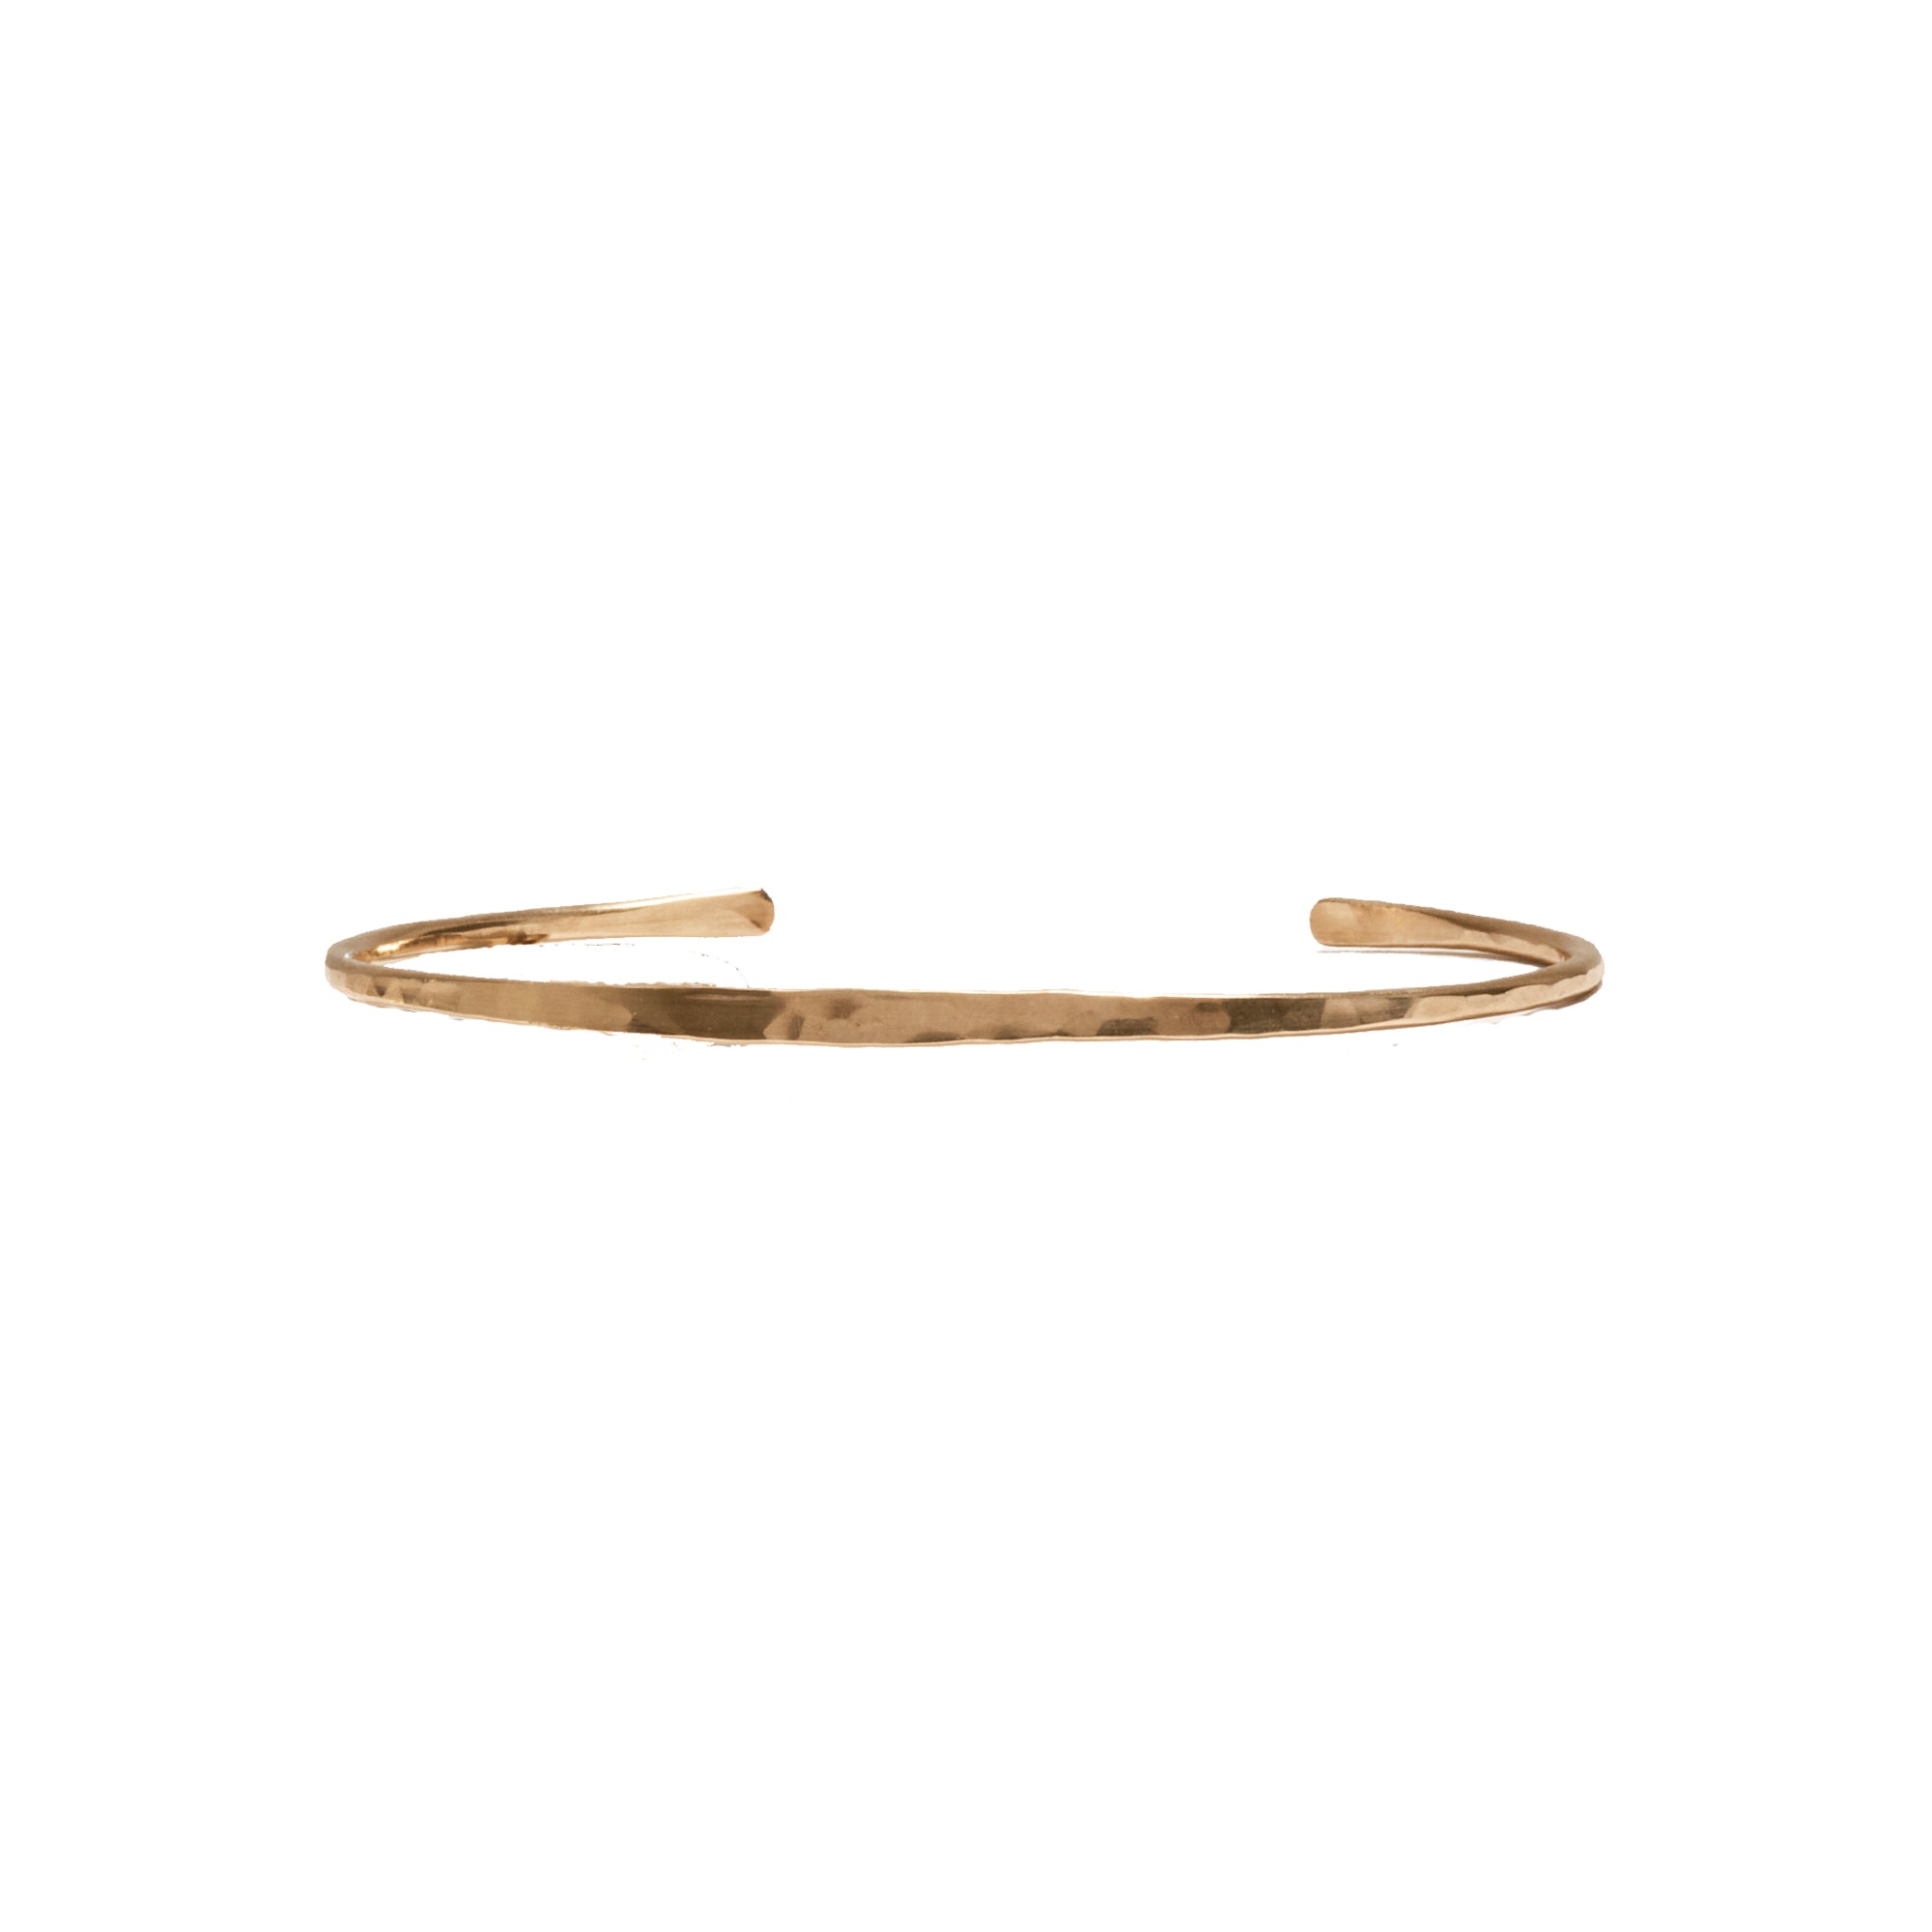 Sleek and sophisticated, the Thin Simple Forged Cuff is the perfect addition to a minimalist collection.